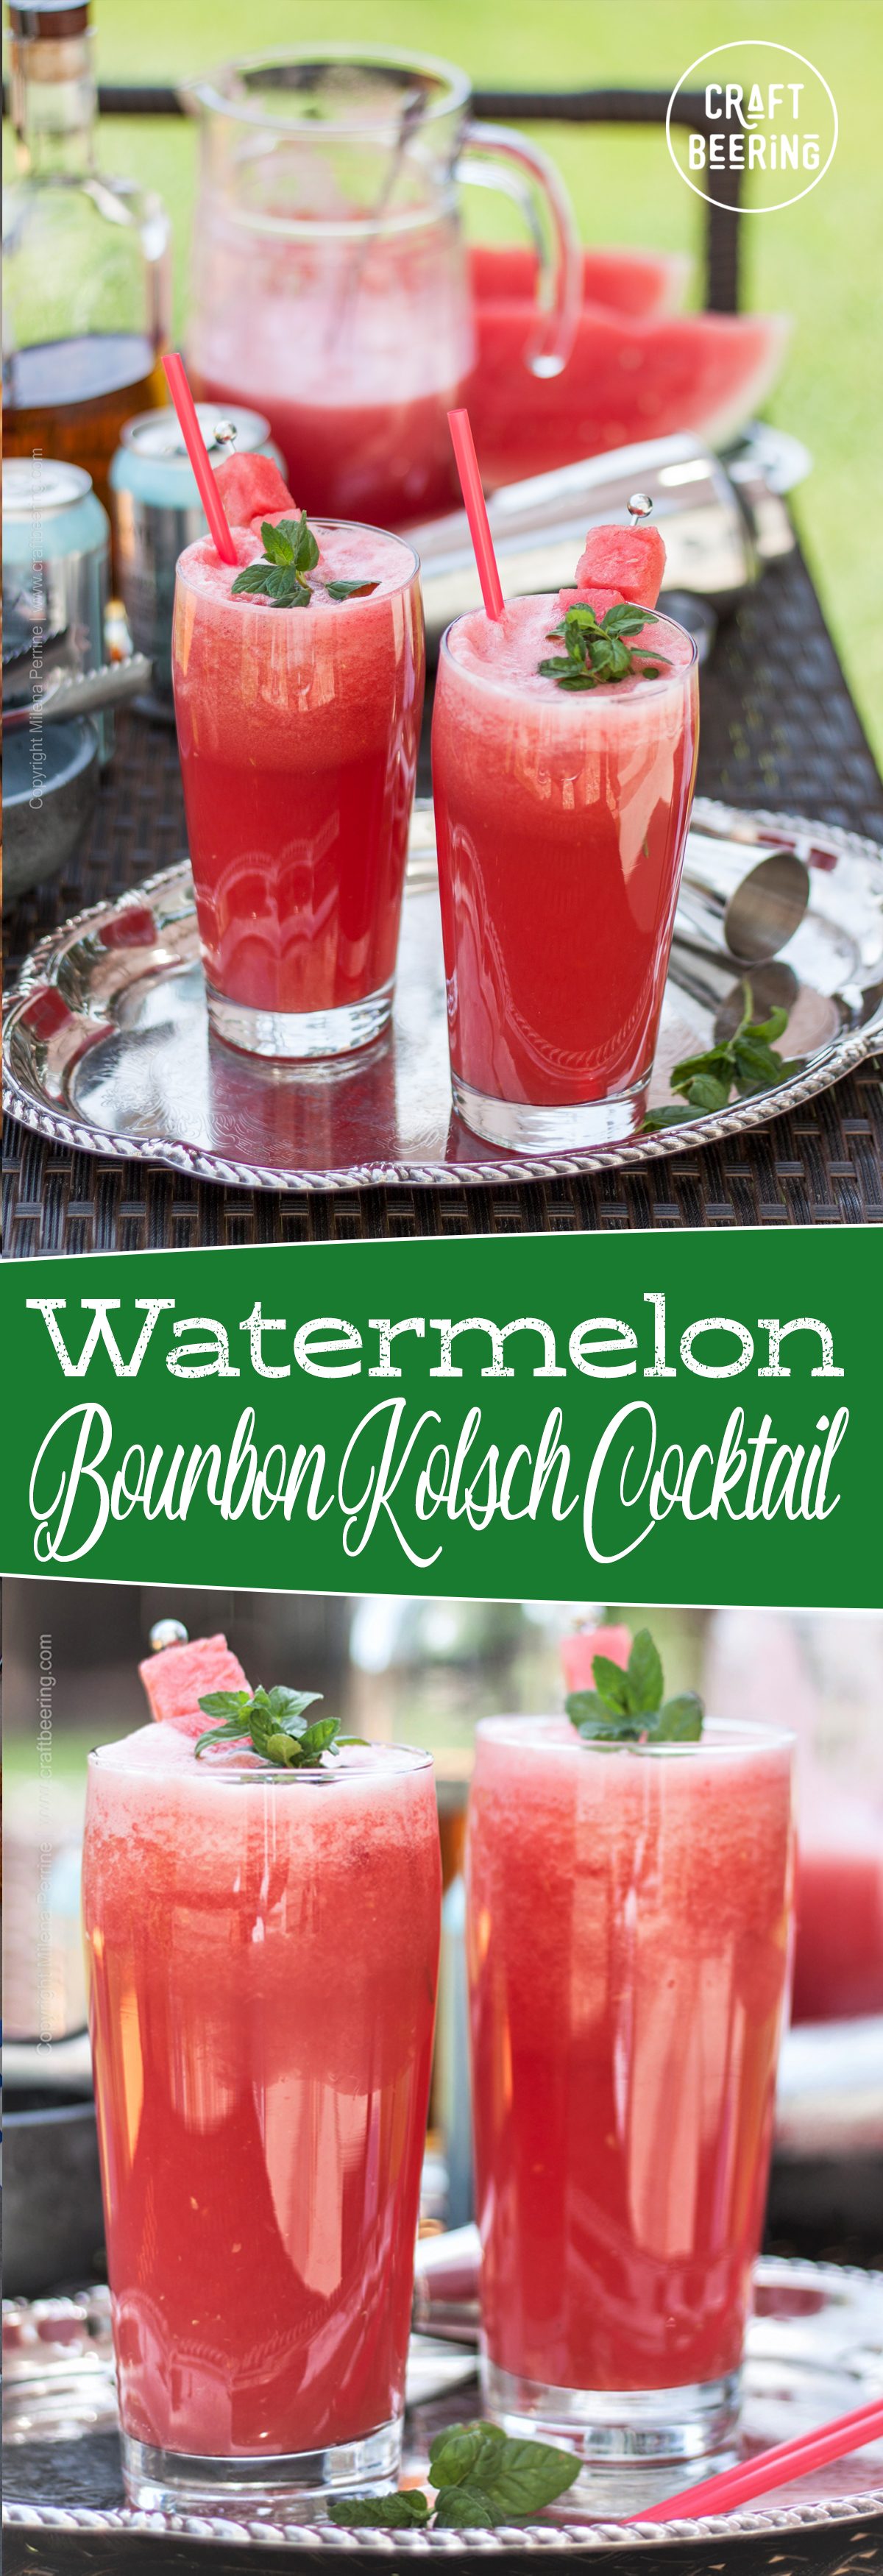 Watermelon cocktail with bourbon and Kolsch. Refreshing summer bliss. #watermelonslushie #watermeloncocktail #beercocktail